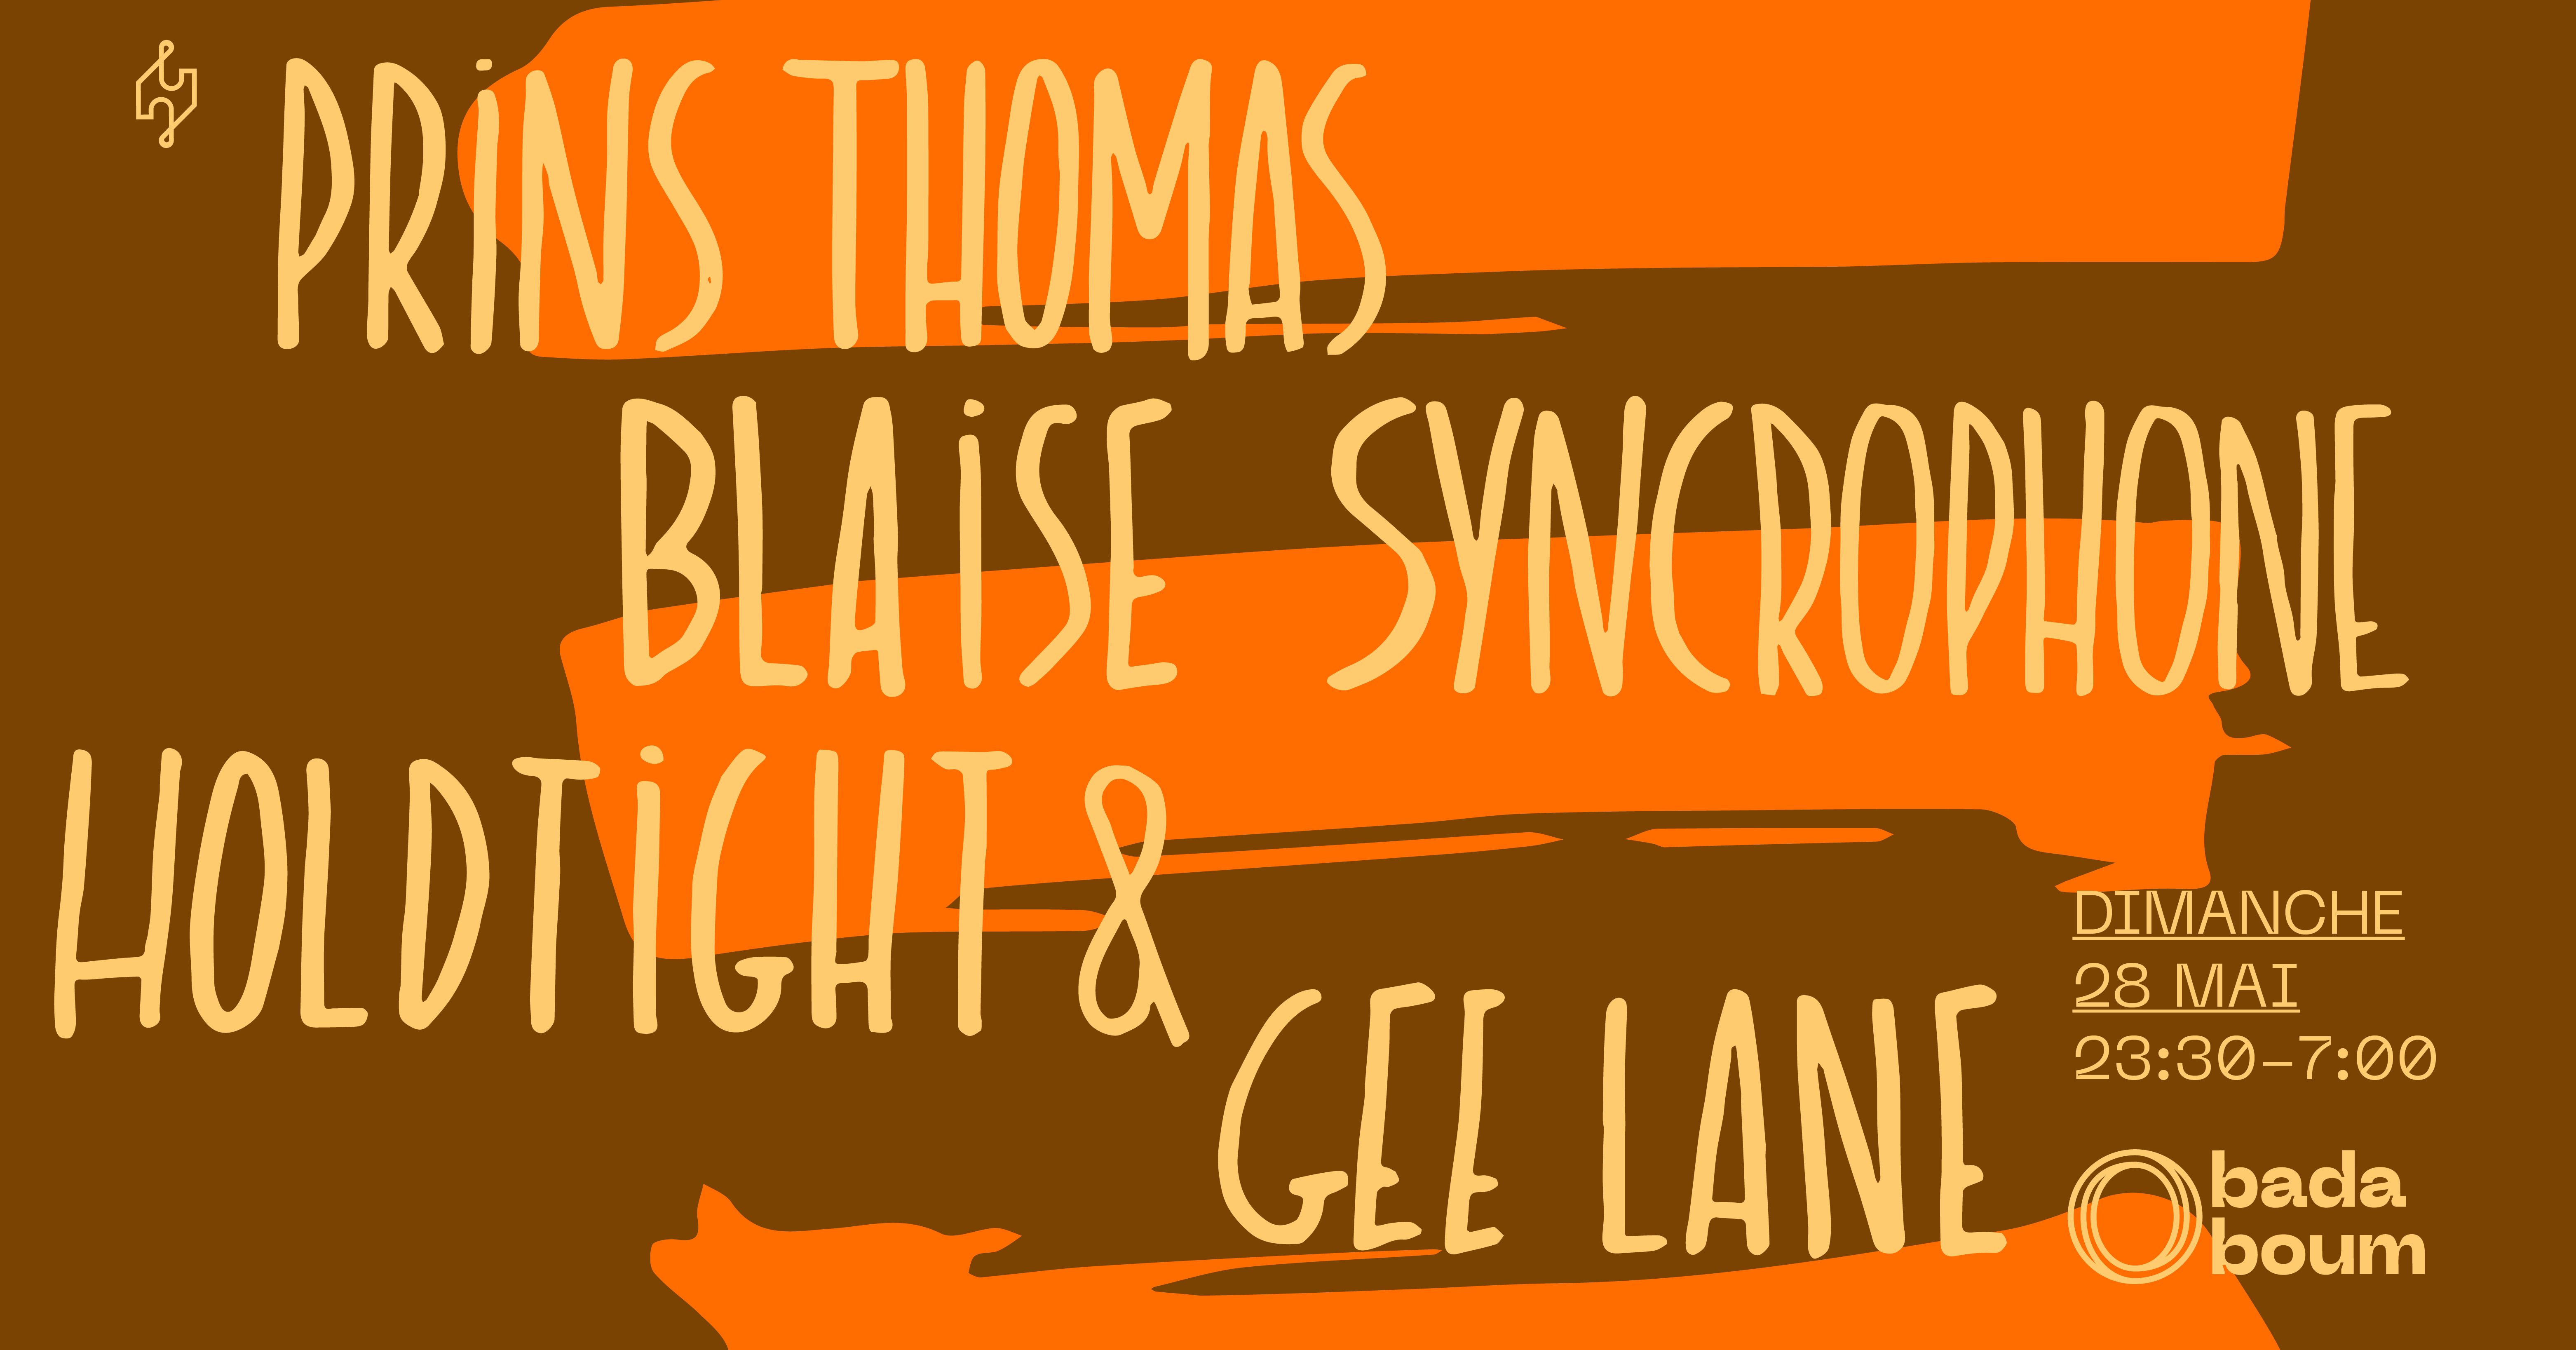 Club - Syncrophone label night with Prins Thomas, HOLDTight - フライヤー表